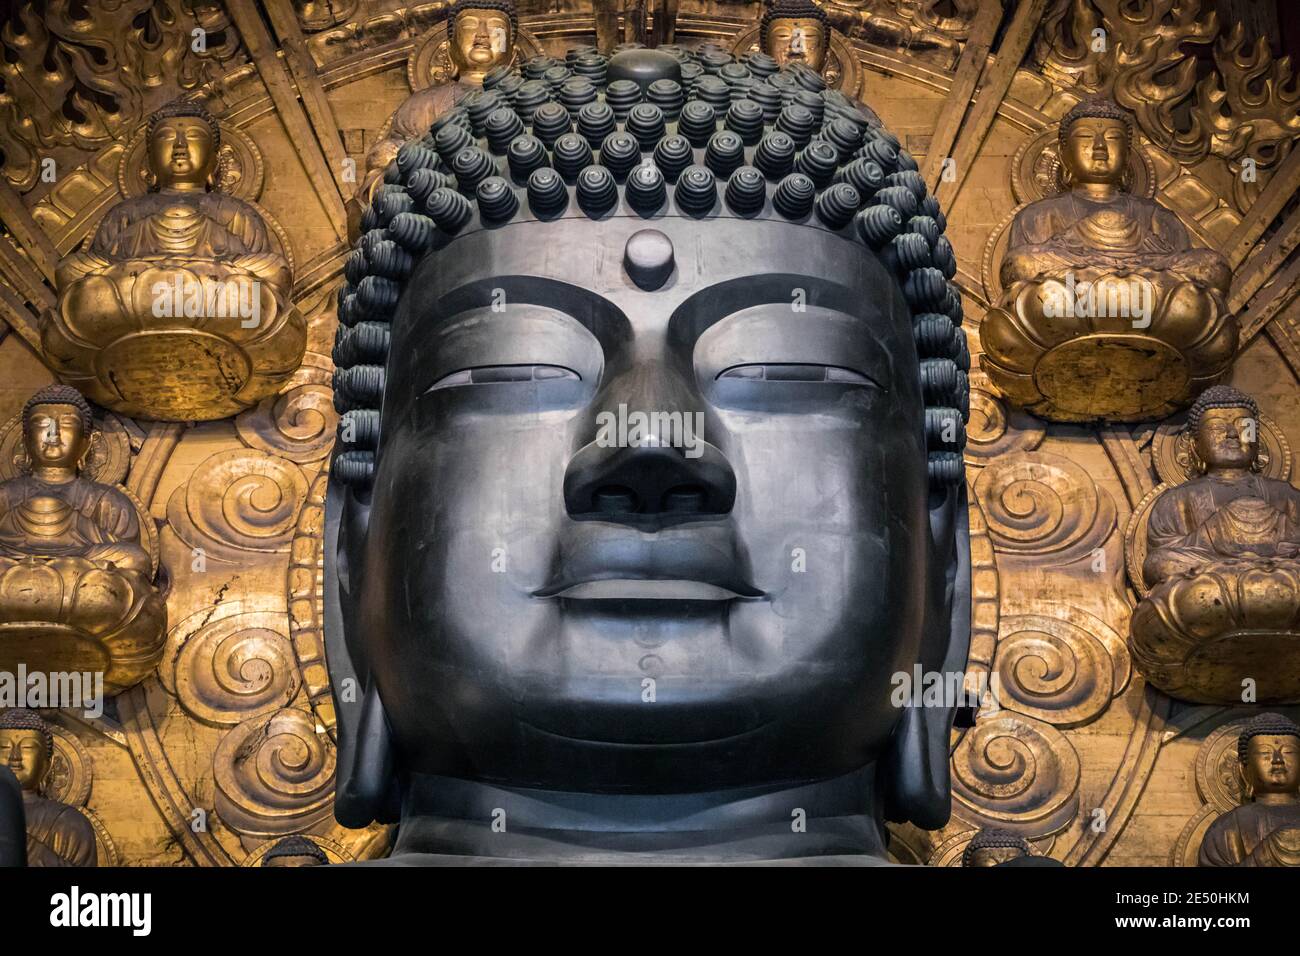 Symmetrical close up view of the huge bronze Buddha statue inside of the Todai-ji temple in Nara Stock Photo